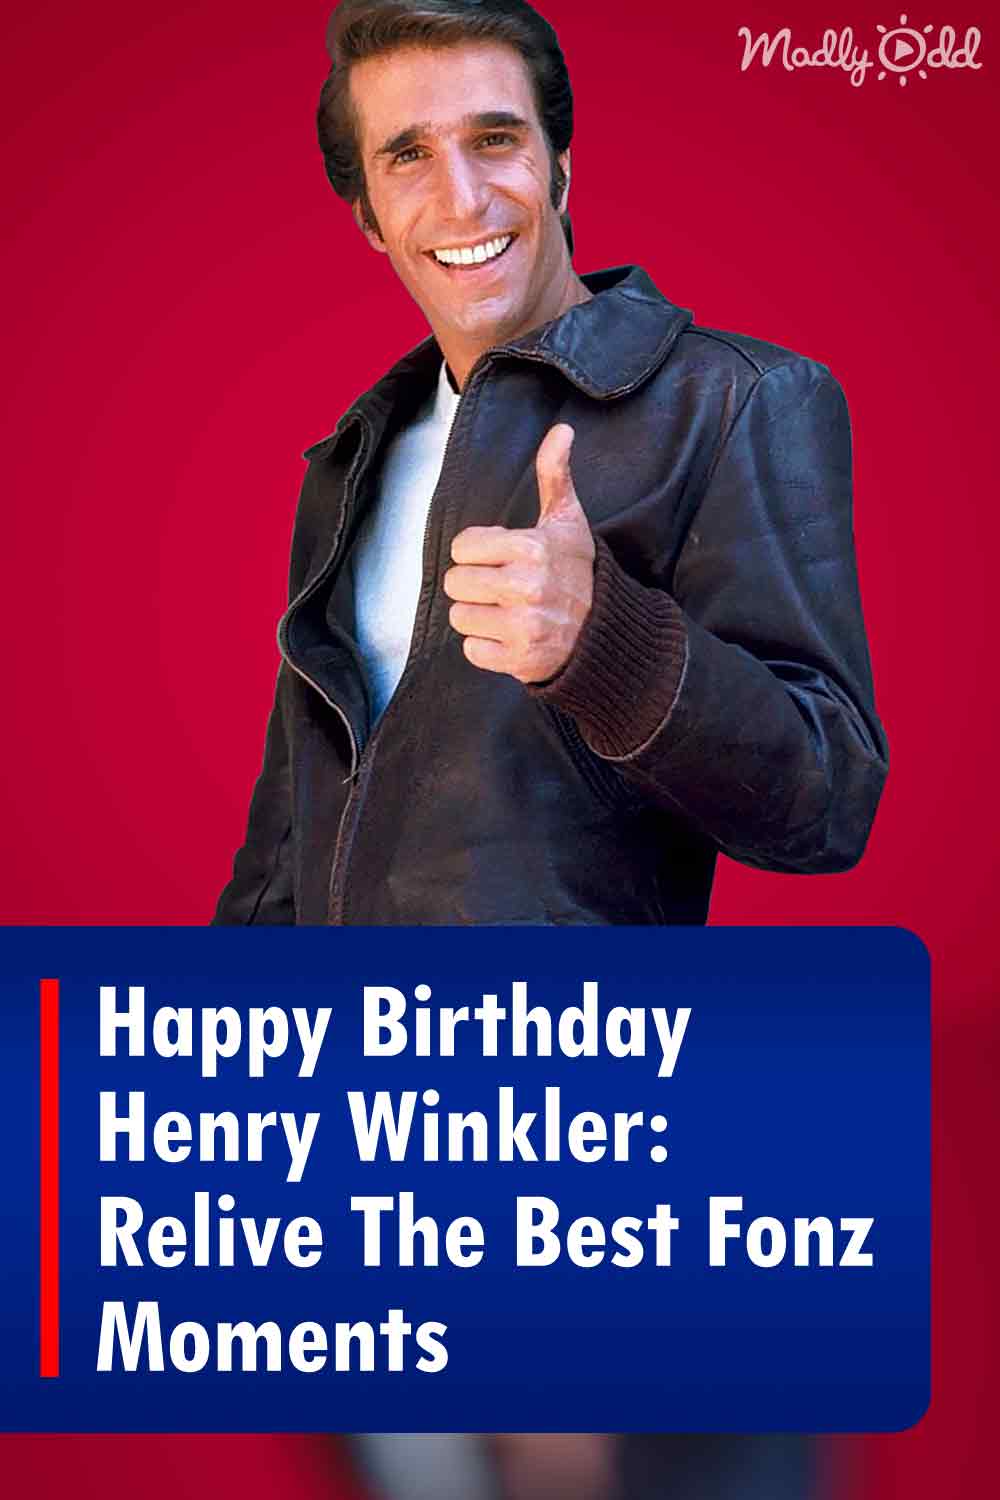 Happy Birthday Henry Winkler: Relive The Best Fonz Moments